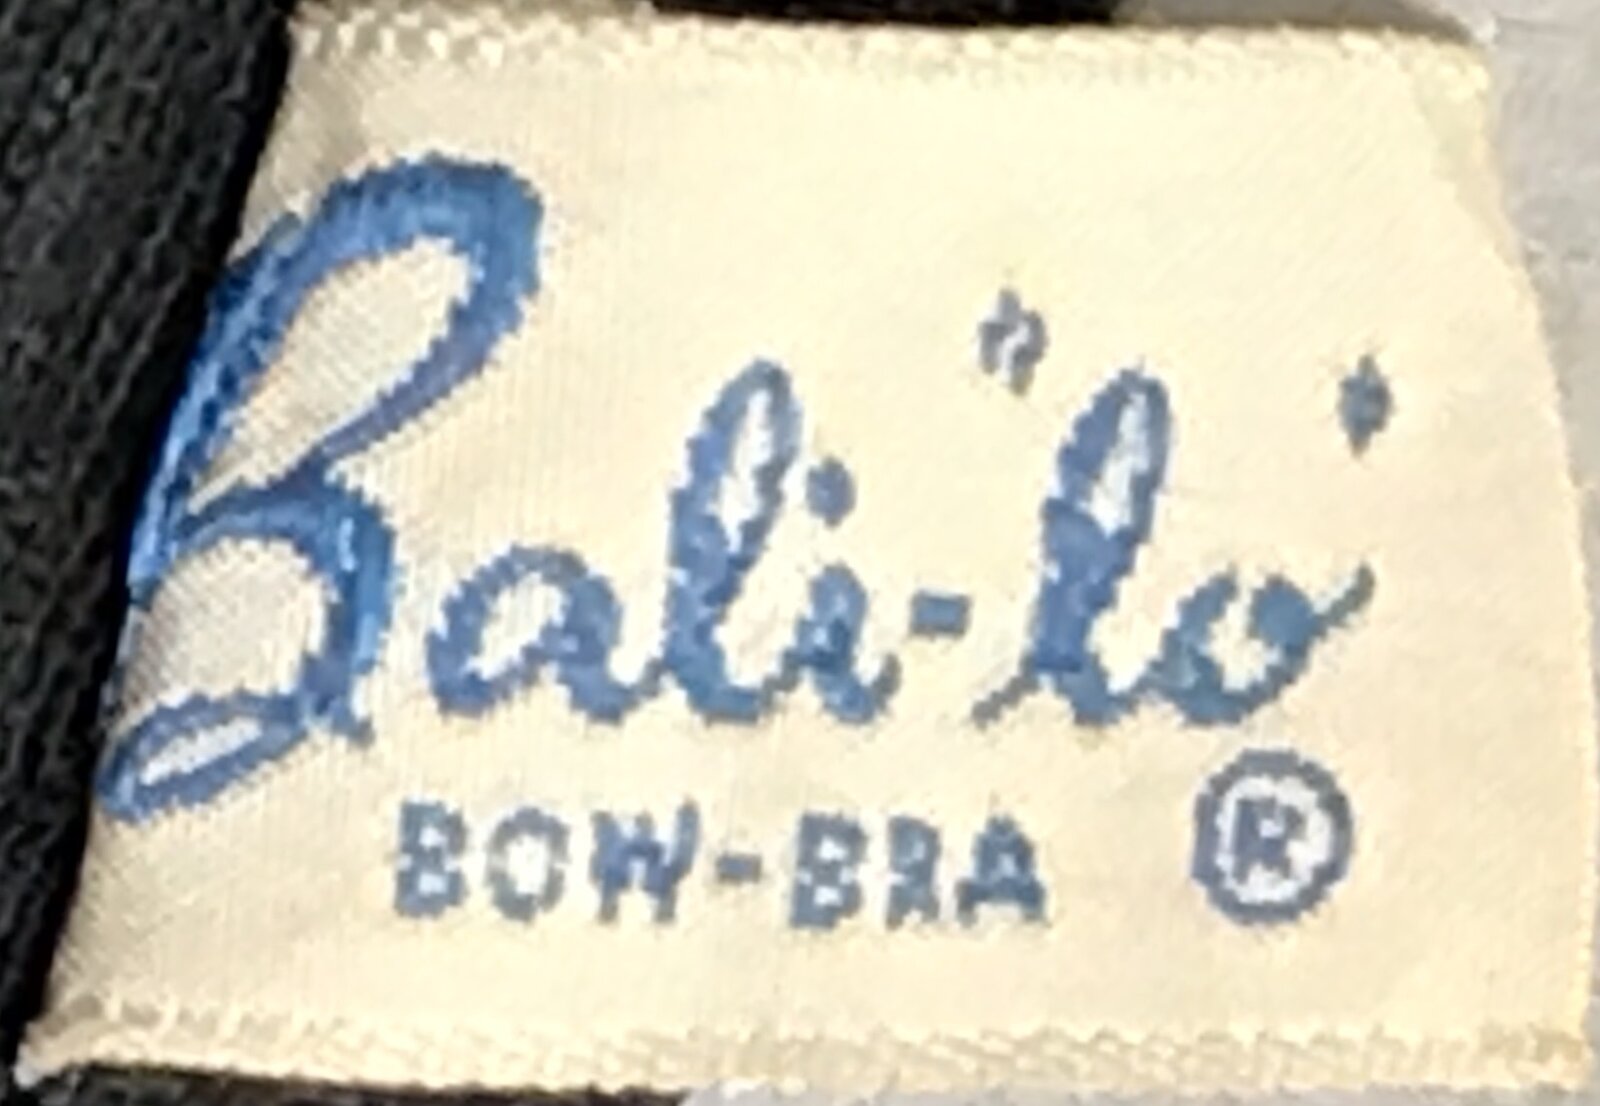 from a 1950s bra - Courtesy of ranchqueenvintage